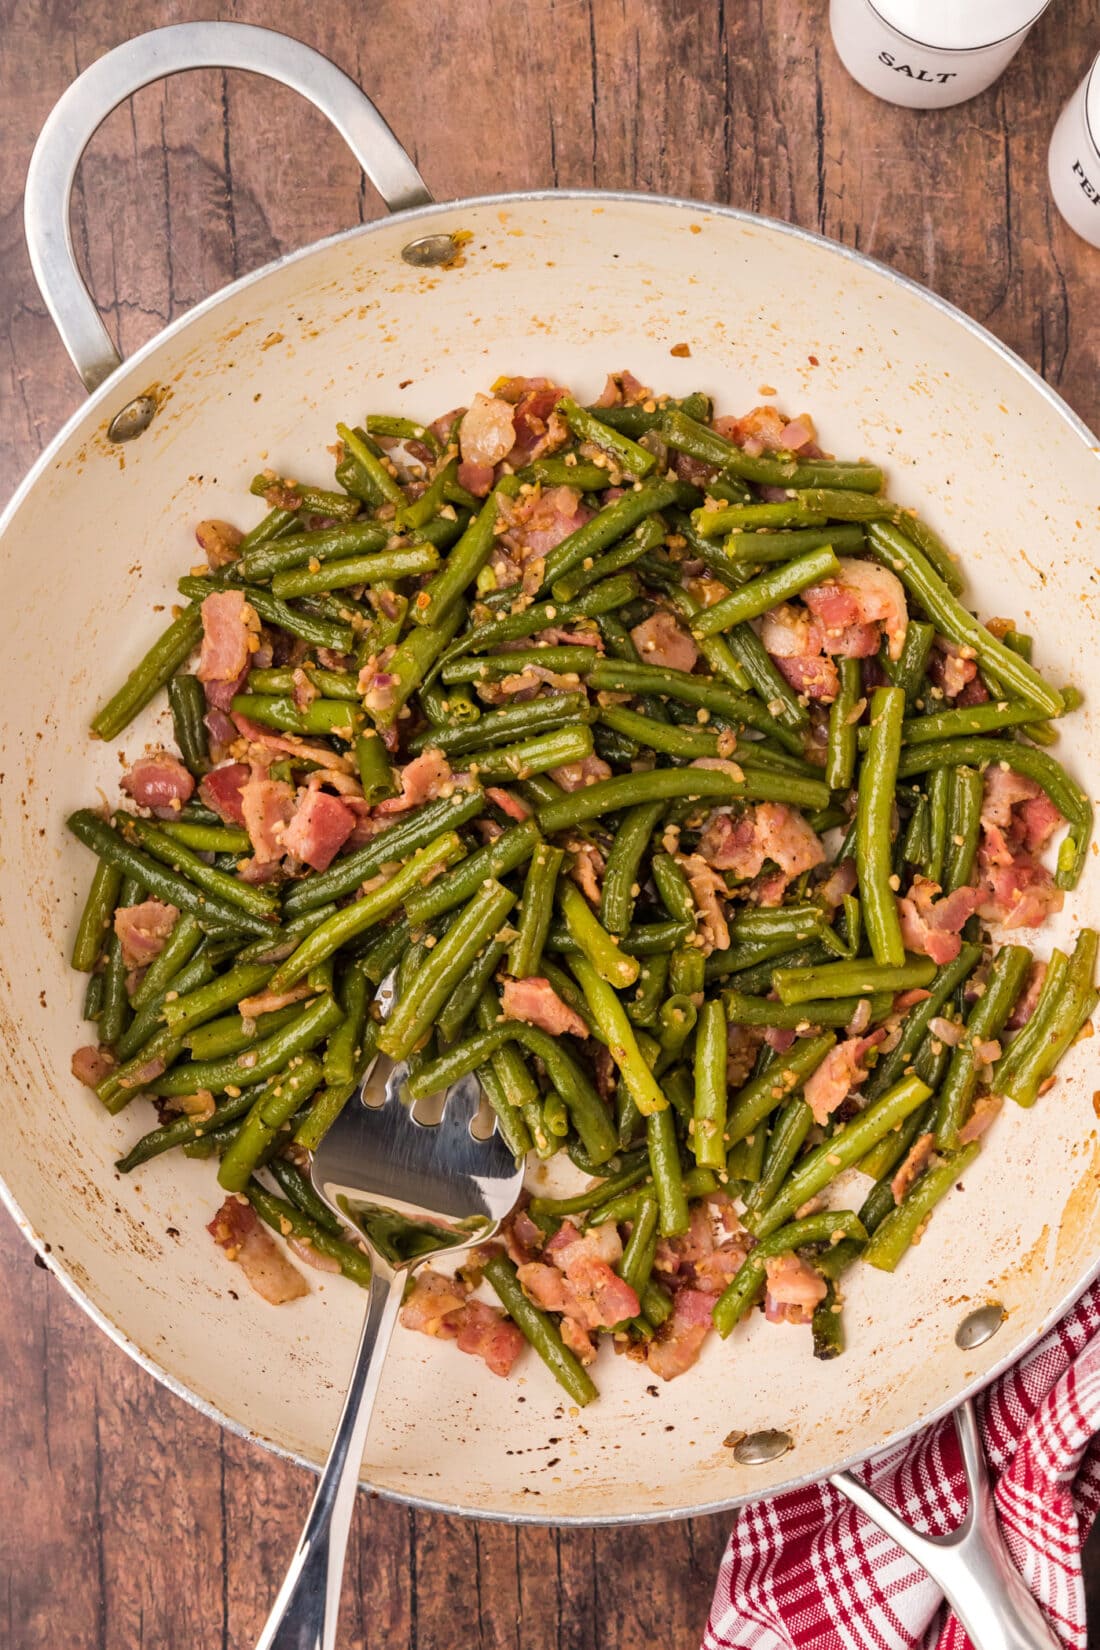 Skillet of Southern Green Beans